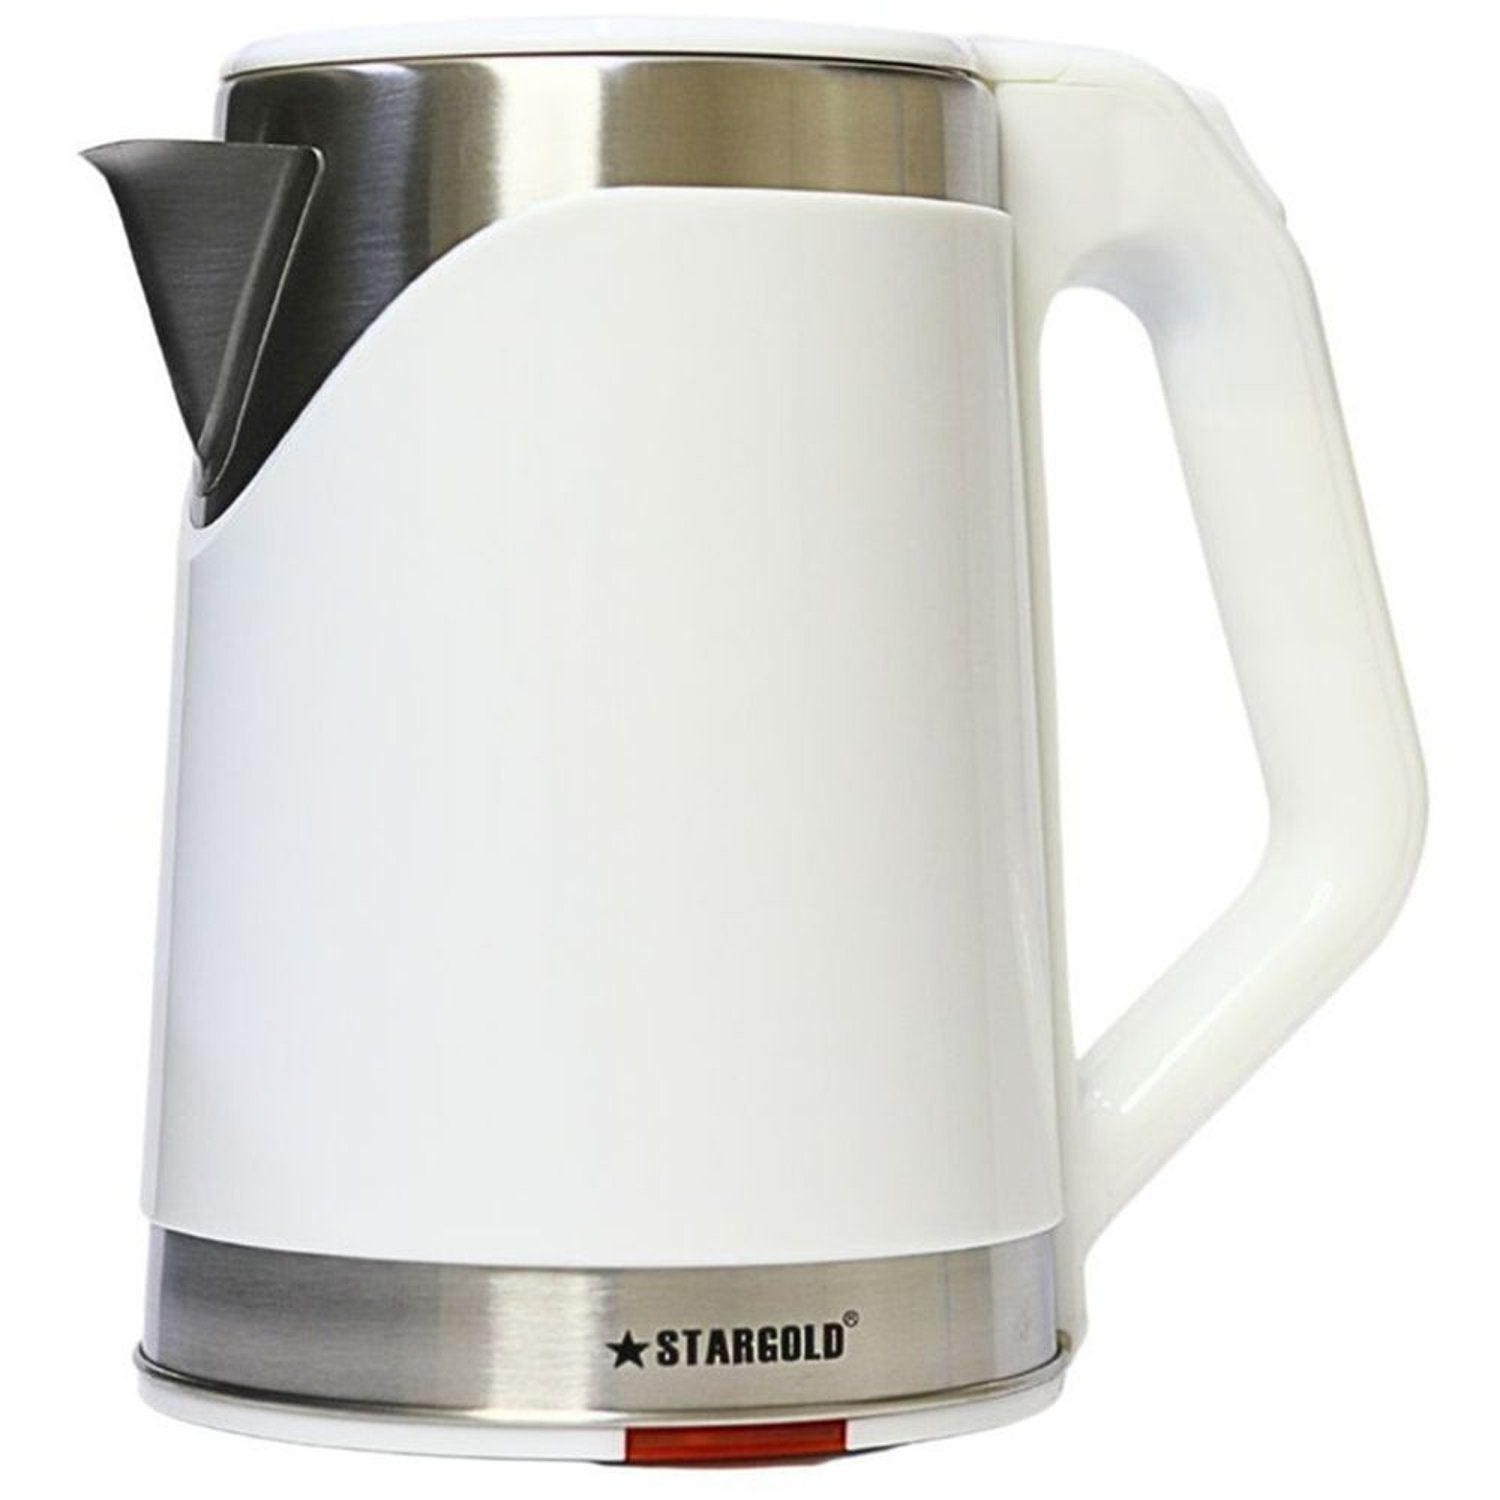 Stargold Electric Kettle 2L with Auto Turn-Off 1850W - SG-1462